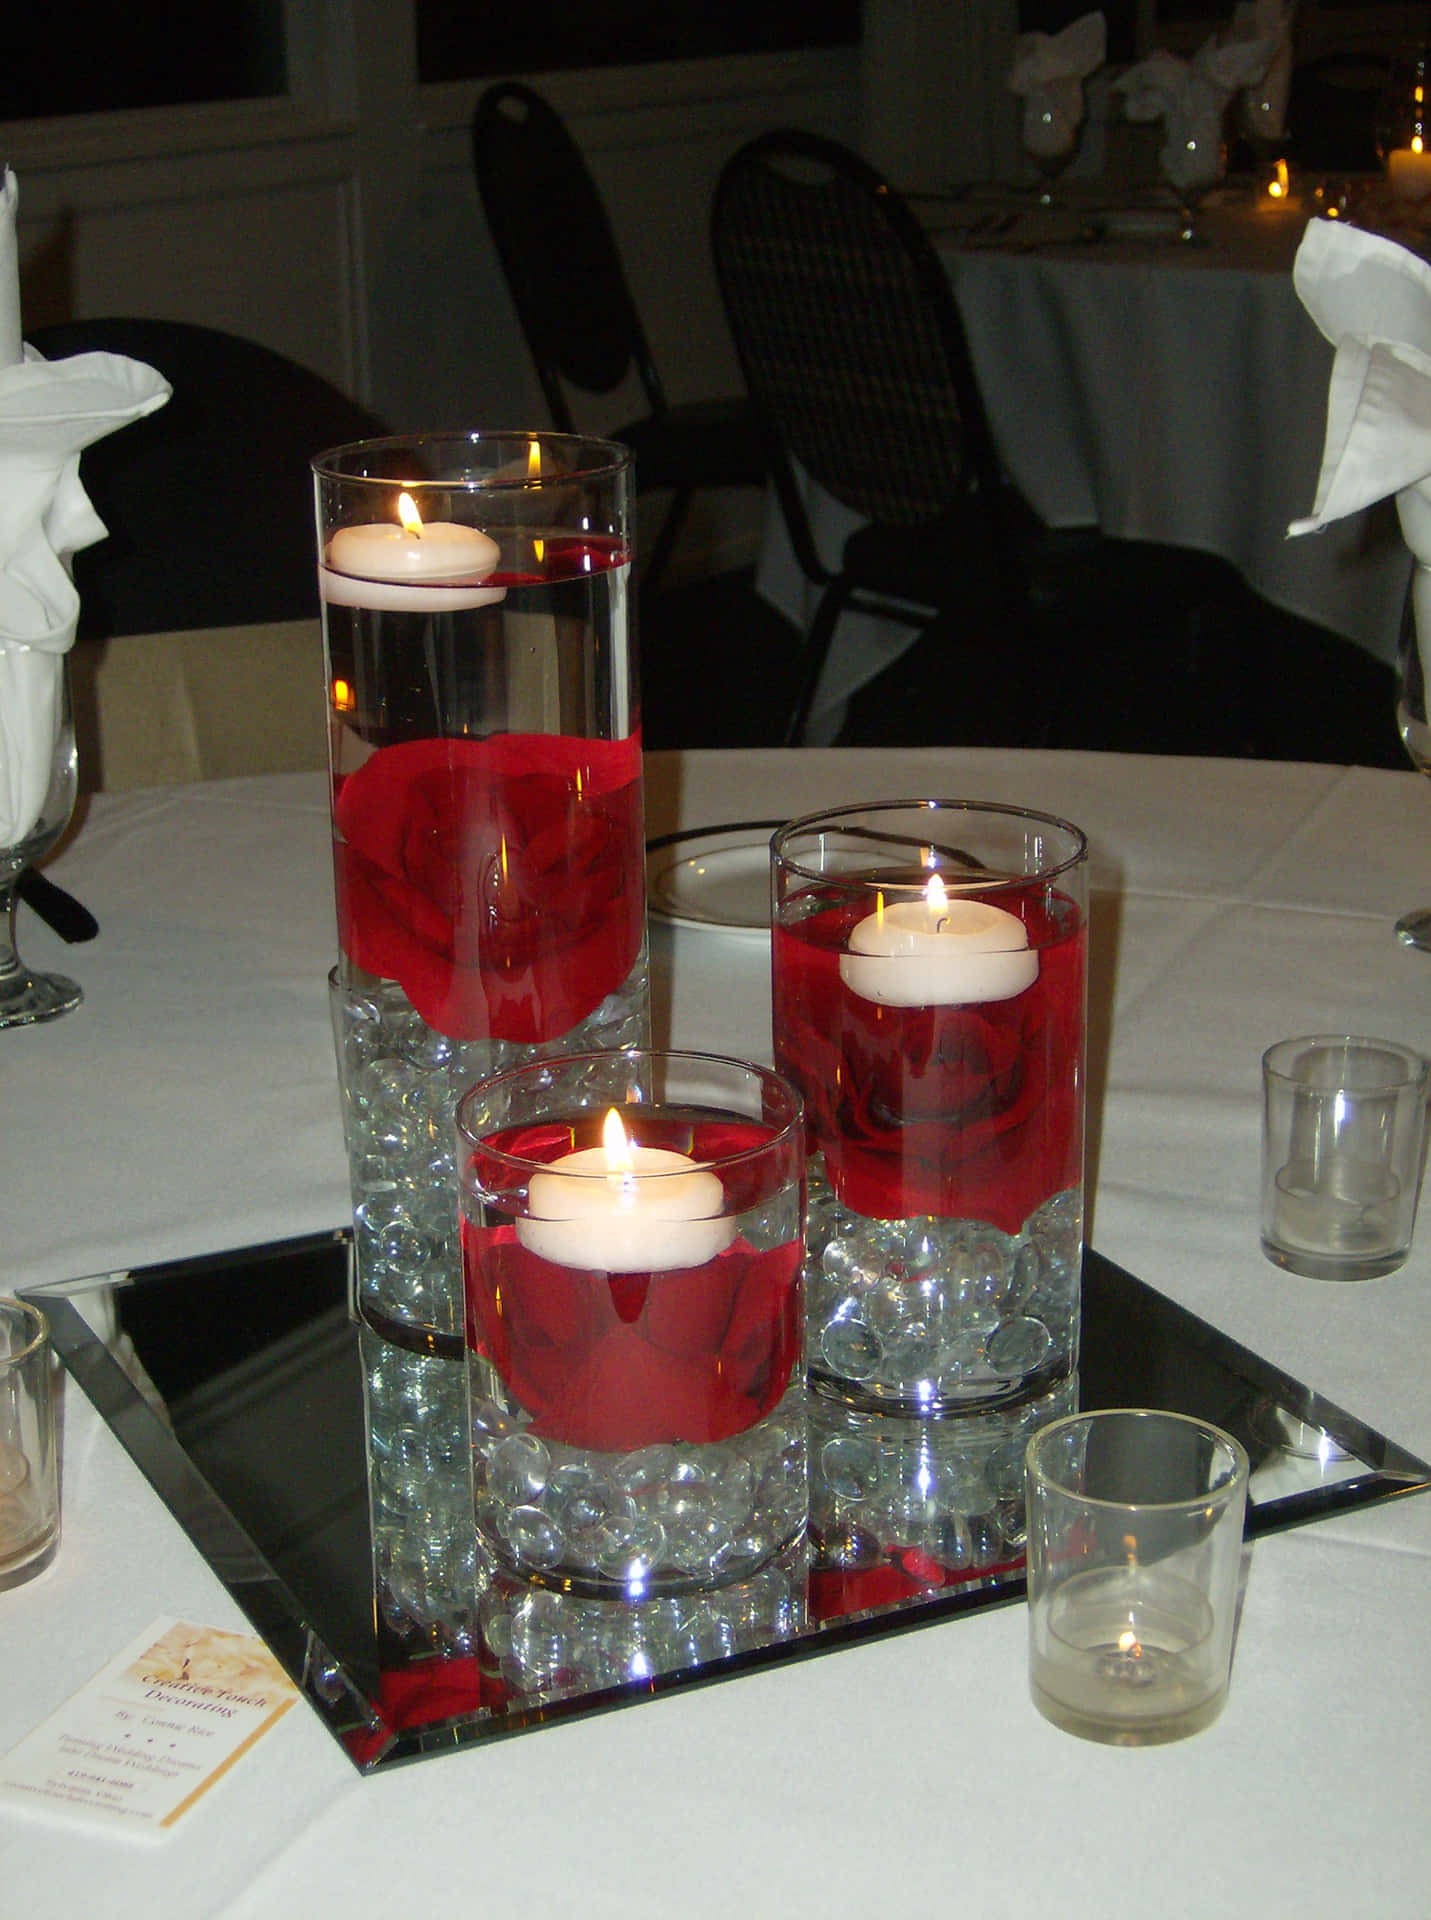 A classic centerpiece idea for any occasion. Wallpaper